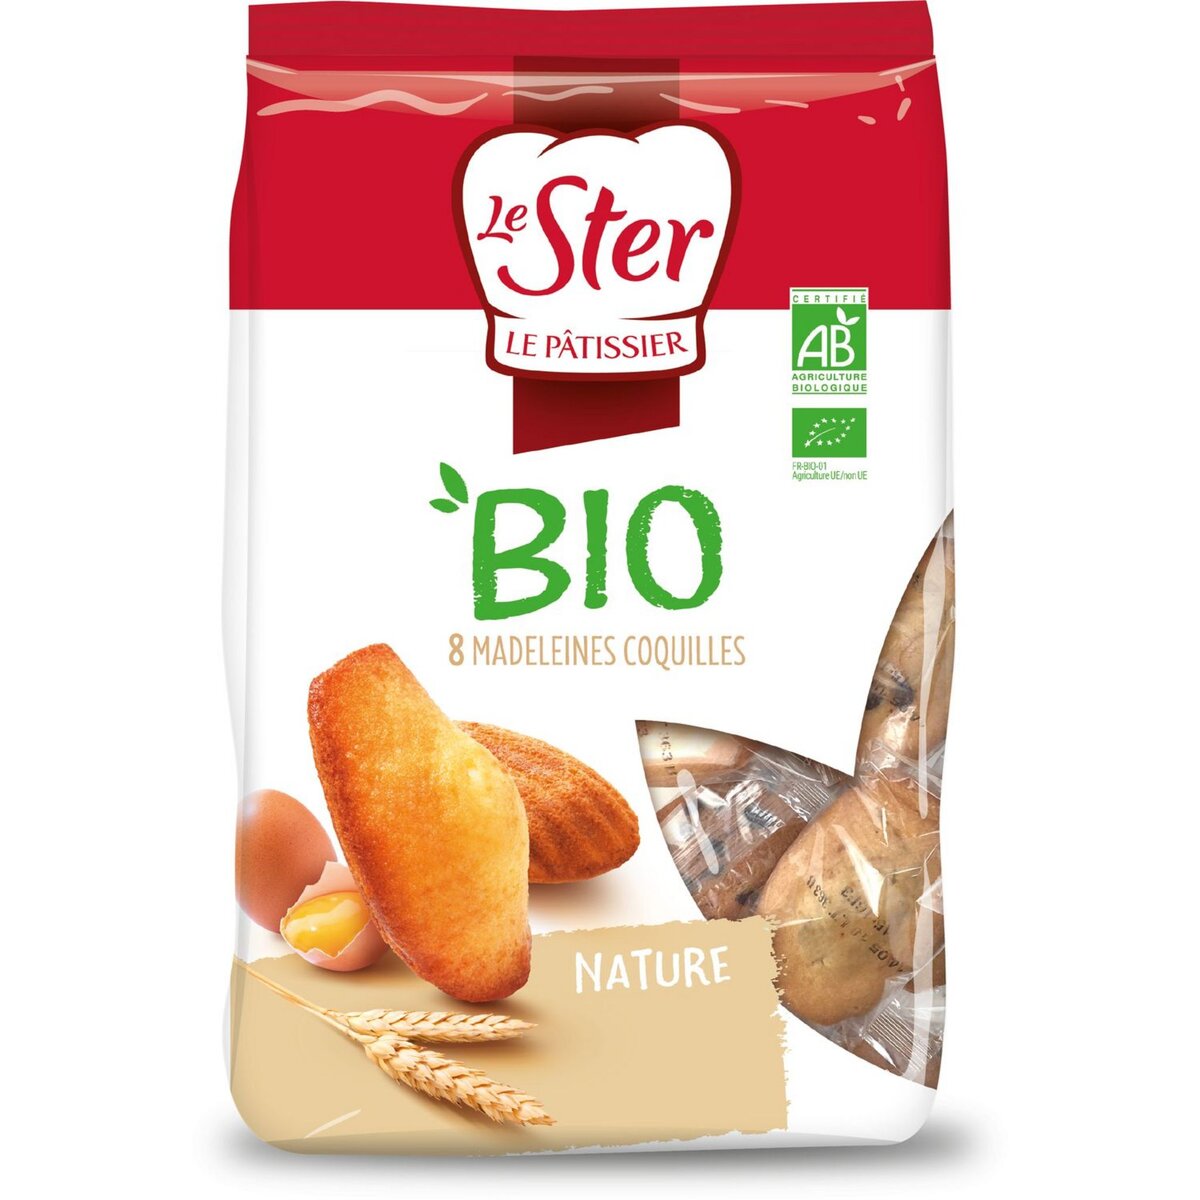 LE STER Le Ster 8 Madeleines coquilles natures bio, sachets individuels 200g 8 madeleines 200g